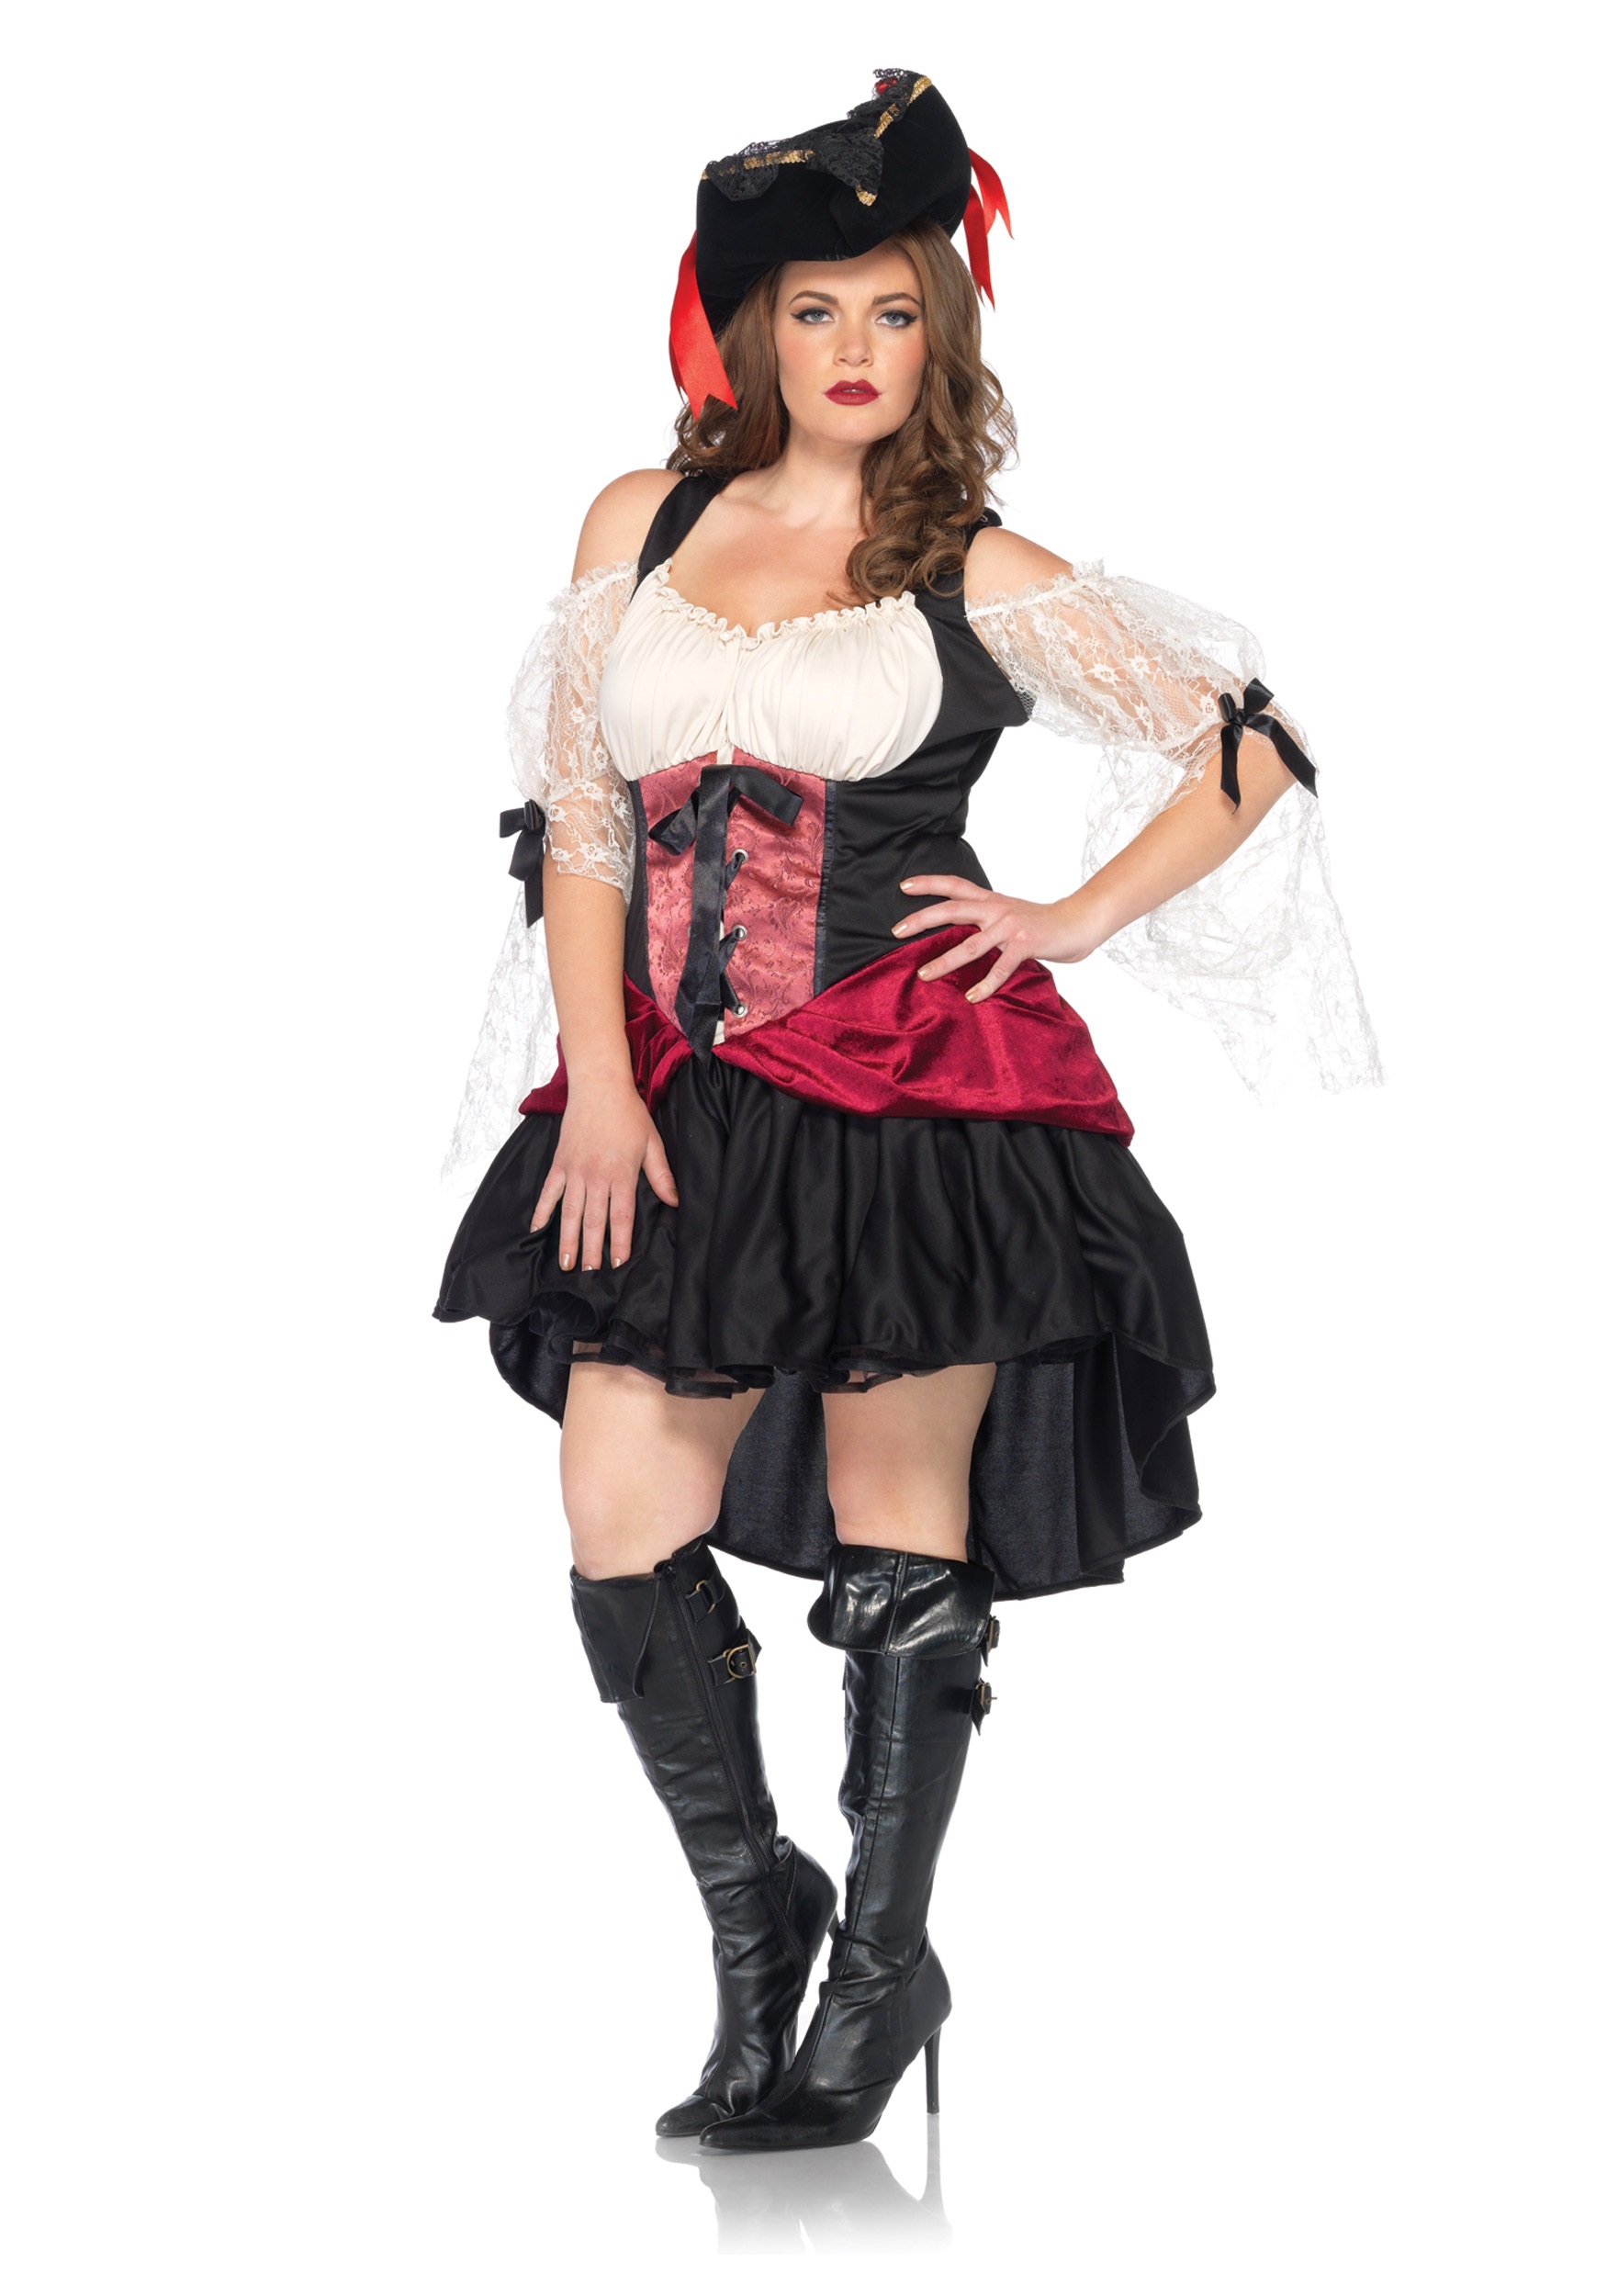 https://images.halloweencostumes.ca/products/14159/1-1/womens-plus-wicked-wench-costume.jpg